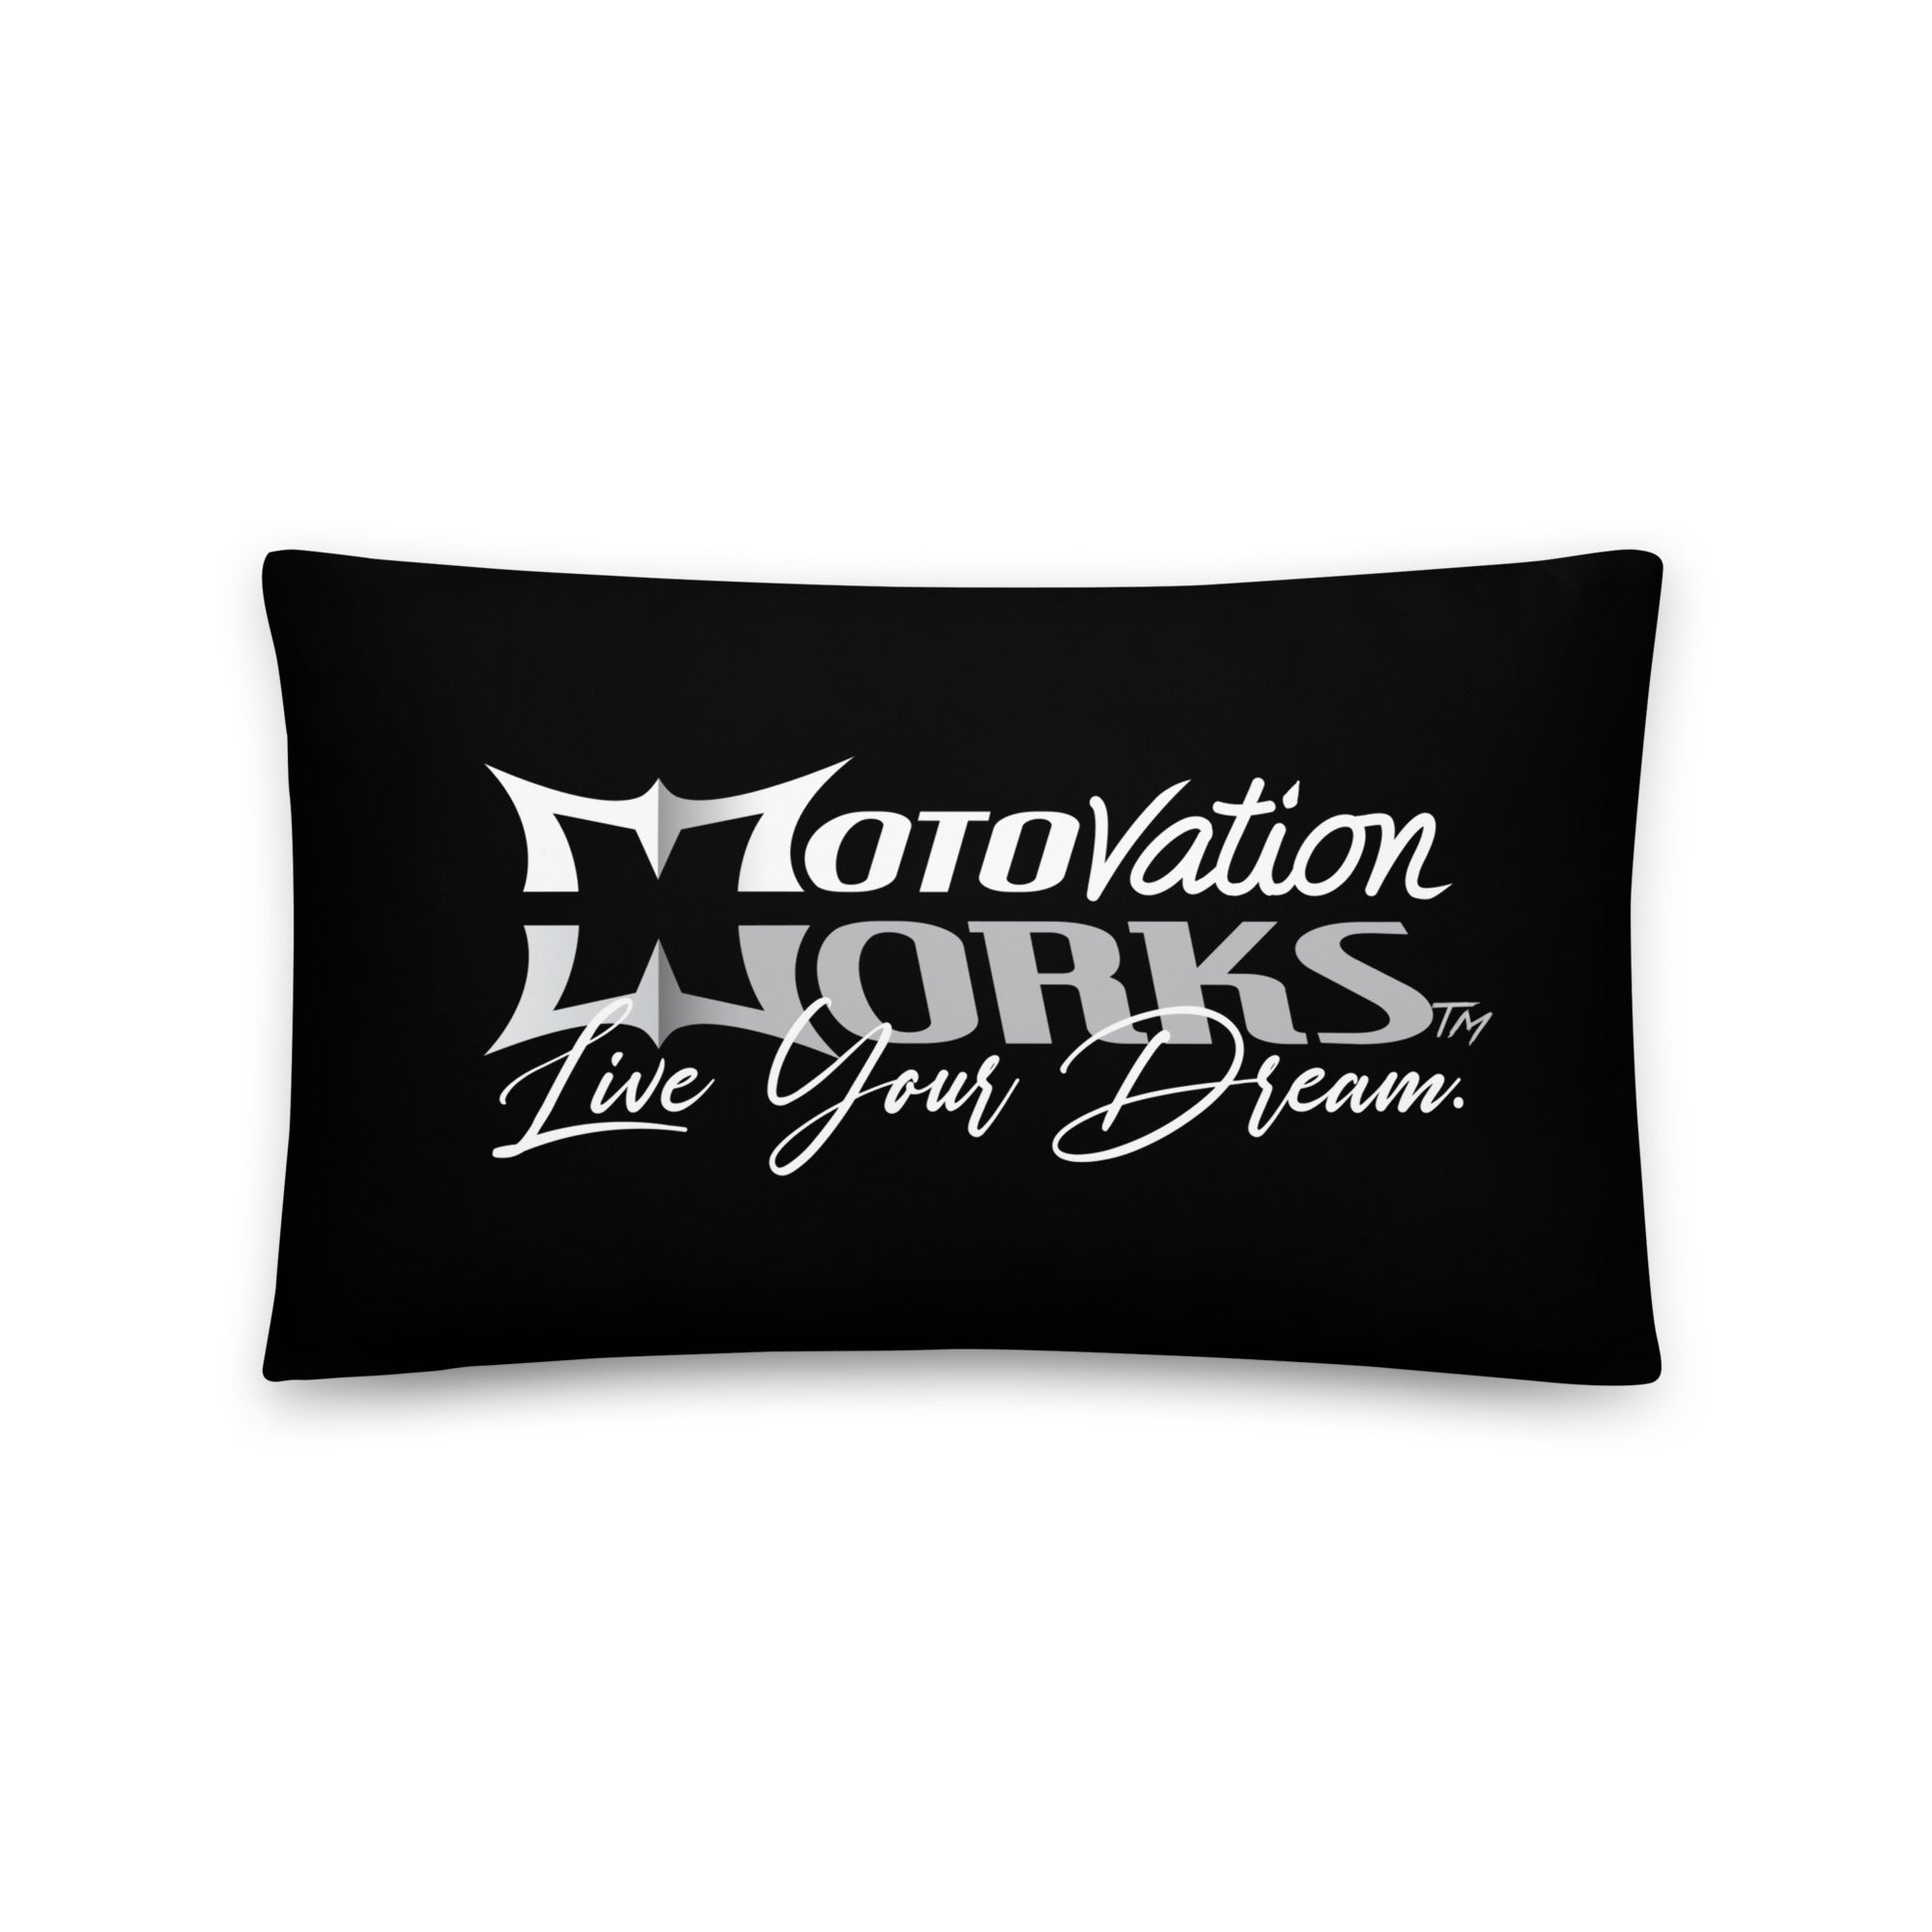 LIVE YOUR DREAM pillow